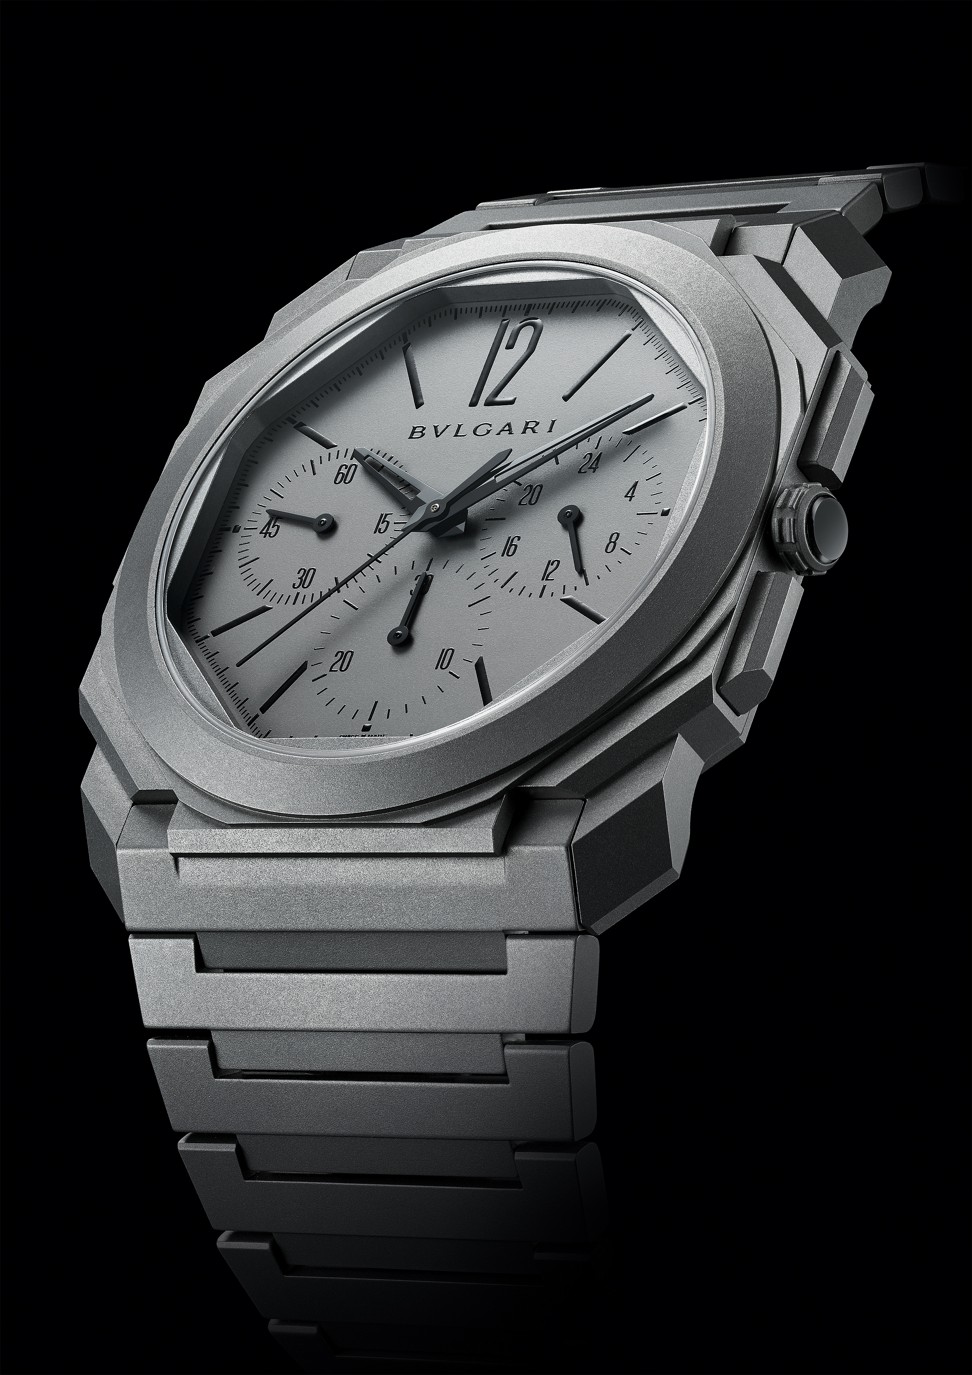 The Octo Finissimo Chronograph GMT Automatic is a technical feat.